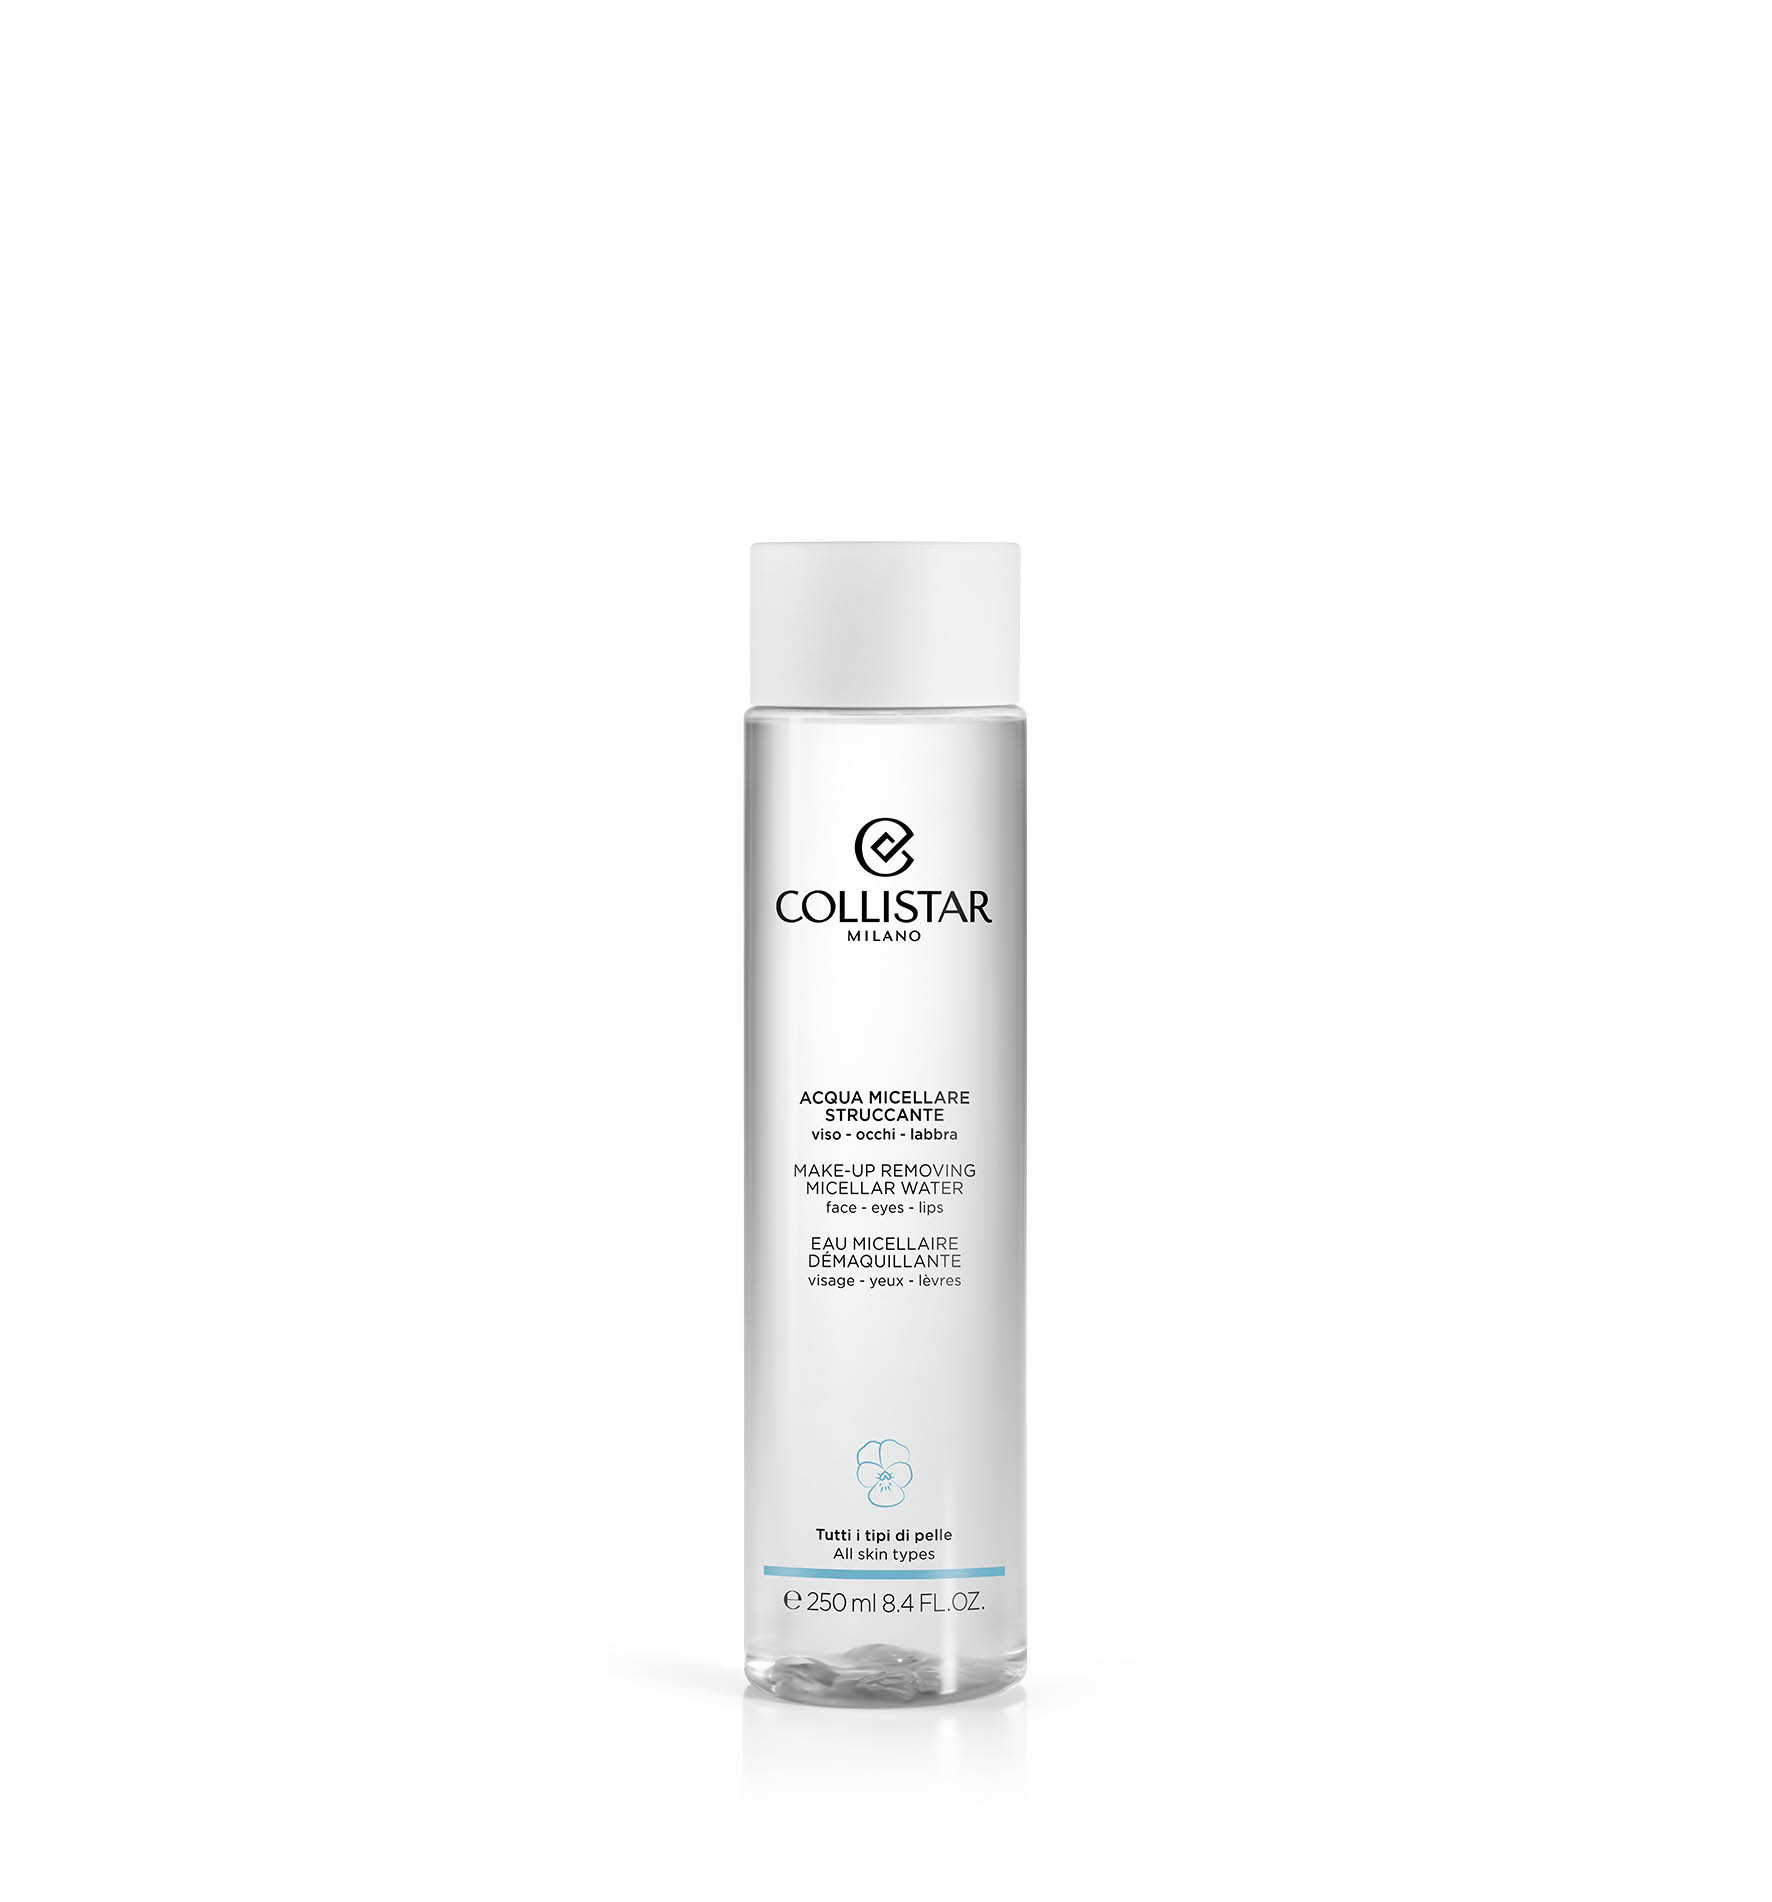 MAKE-UP REMOVING MICELLAR WATER FACE-EYES-LIPS - Combination and Oily Skin | Collistar - Shop Online Ufficiale